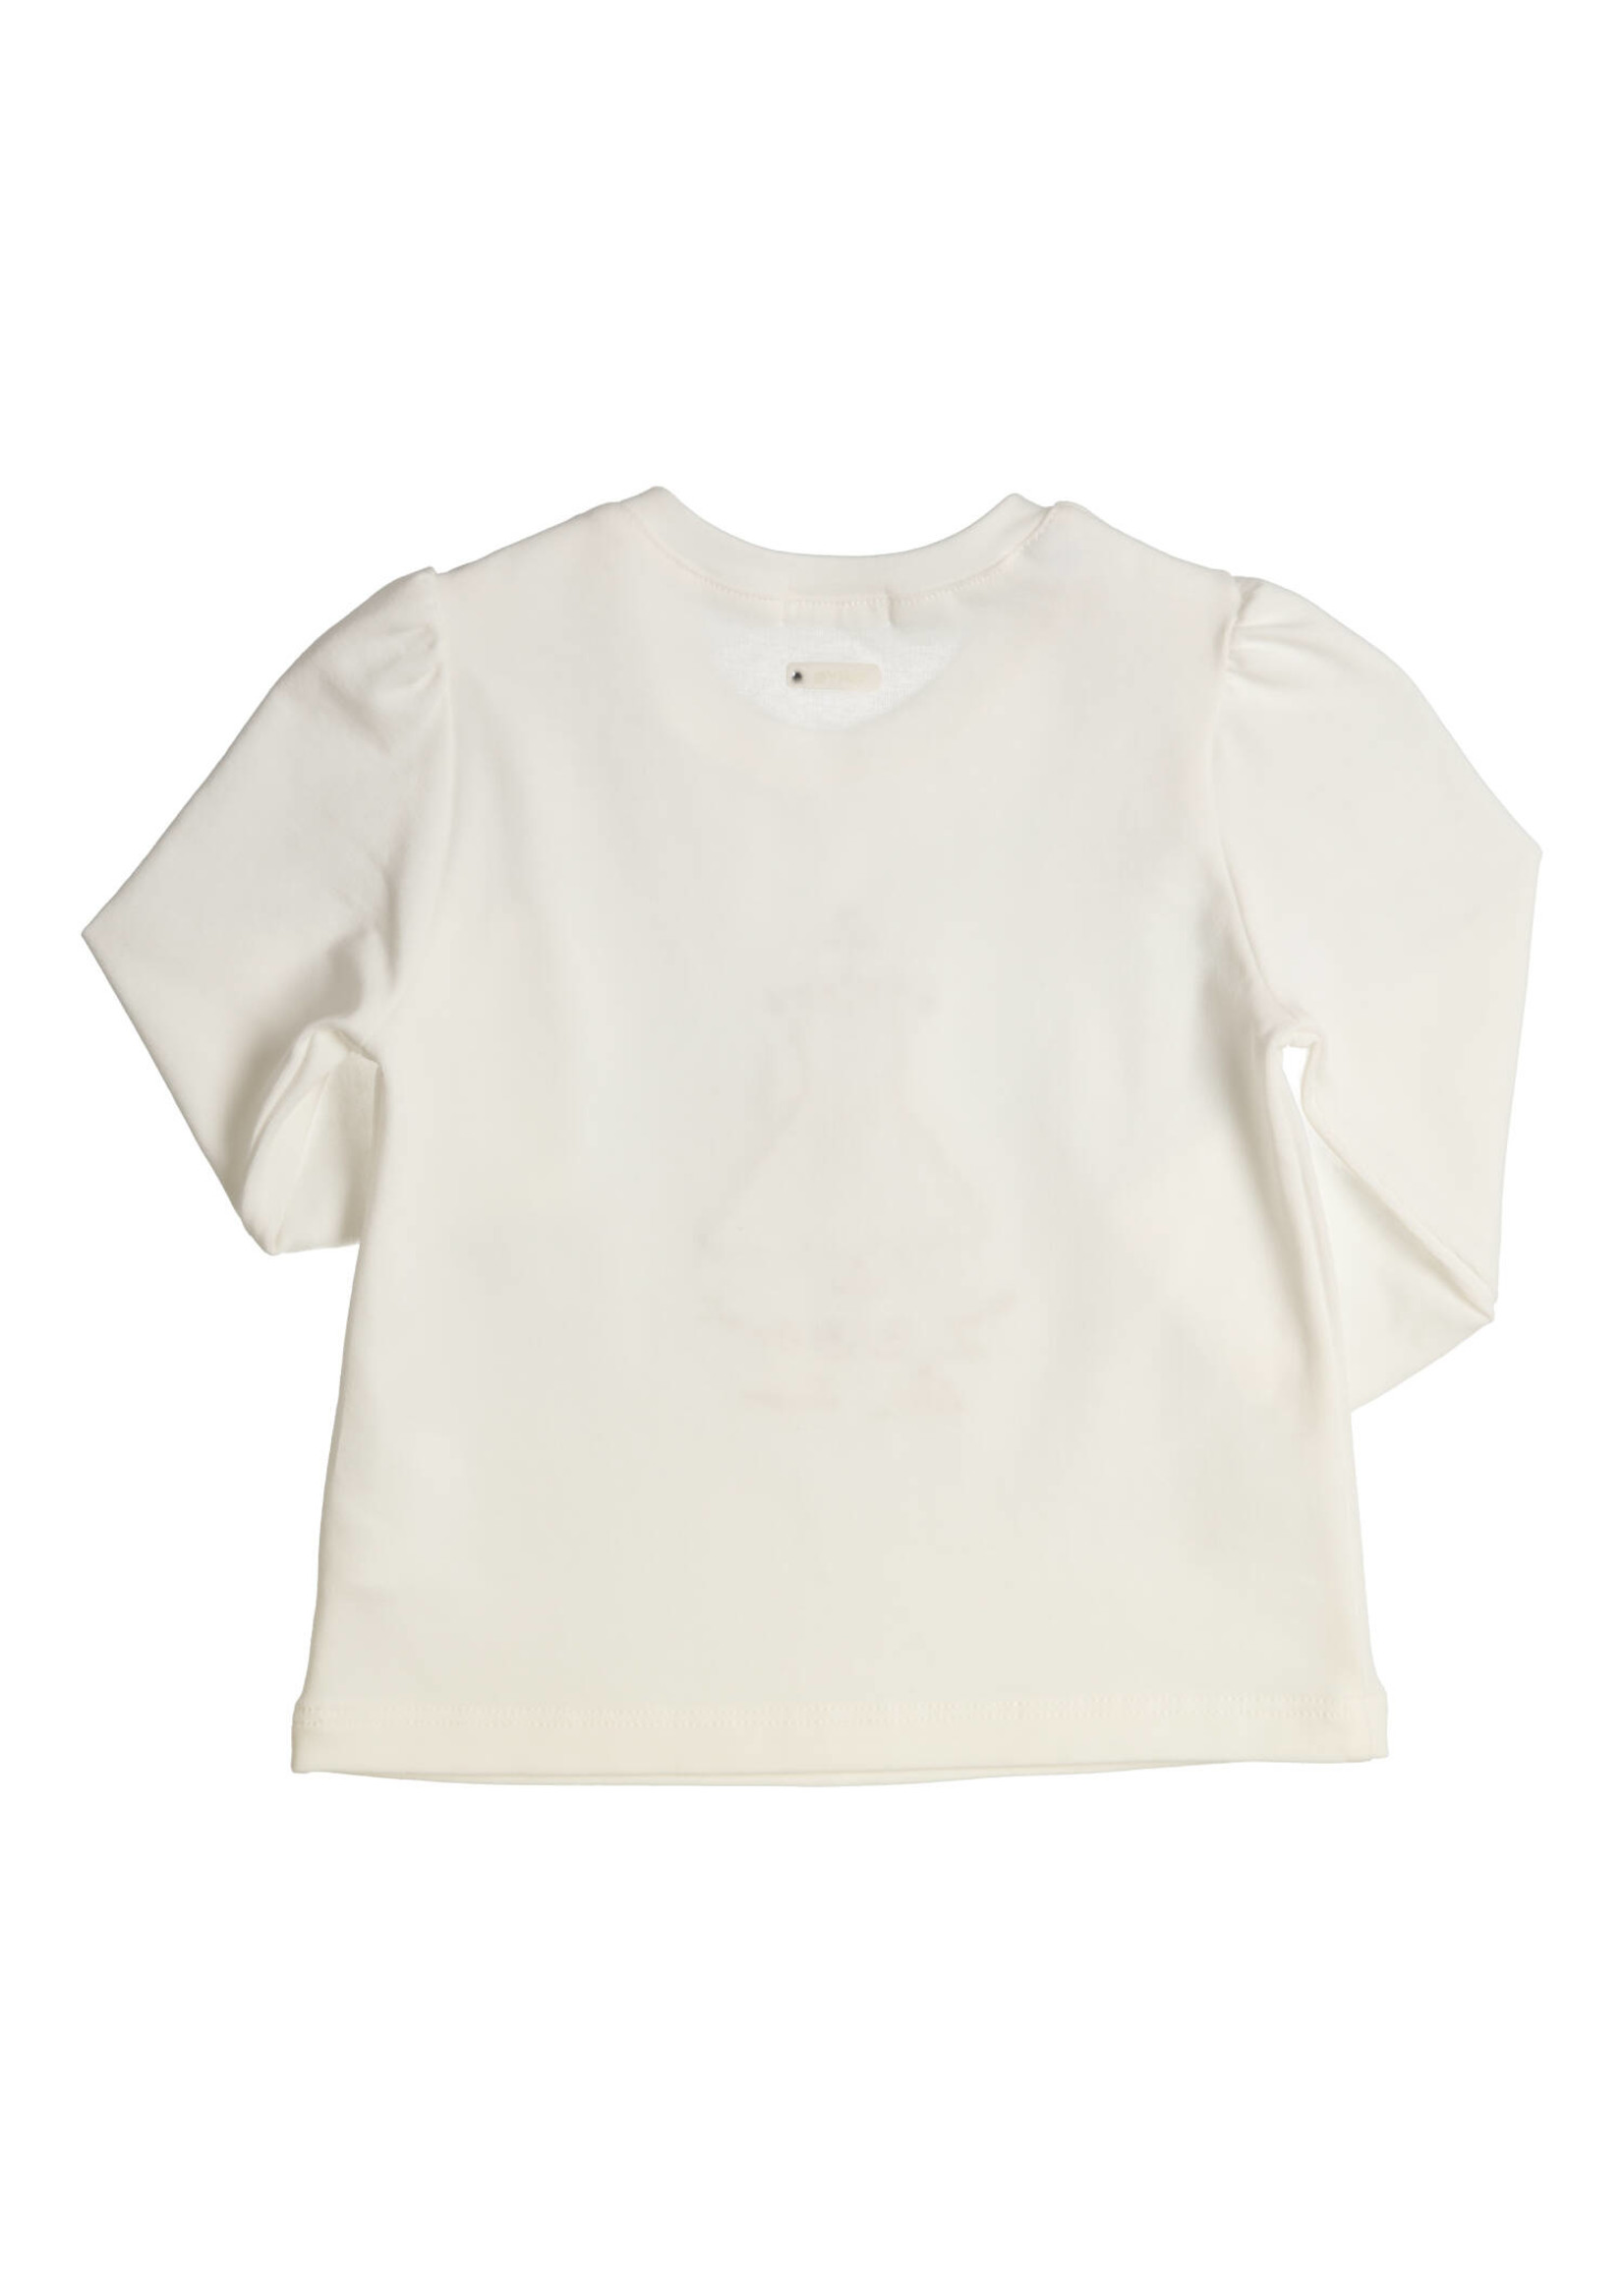 Gymp Longsleeve Aerobic Off White - Gold 352-3312-10